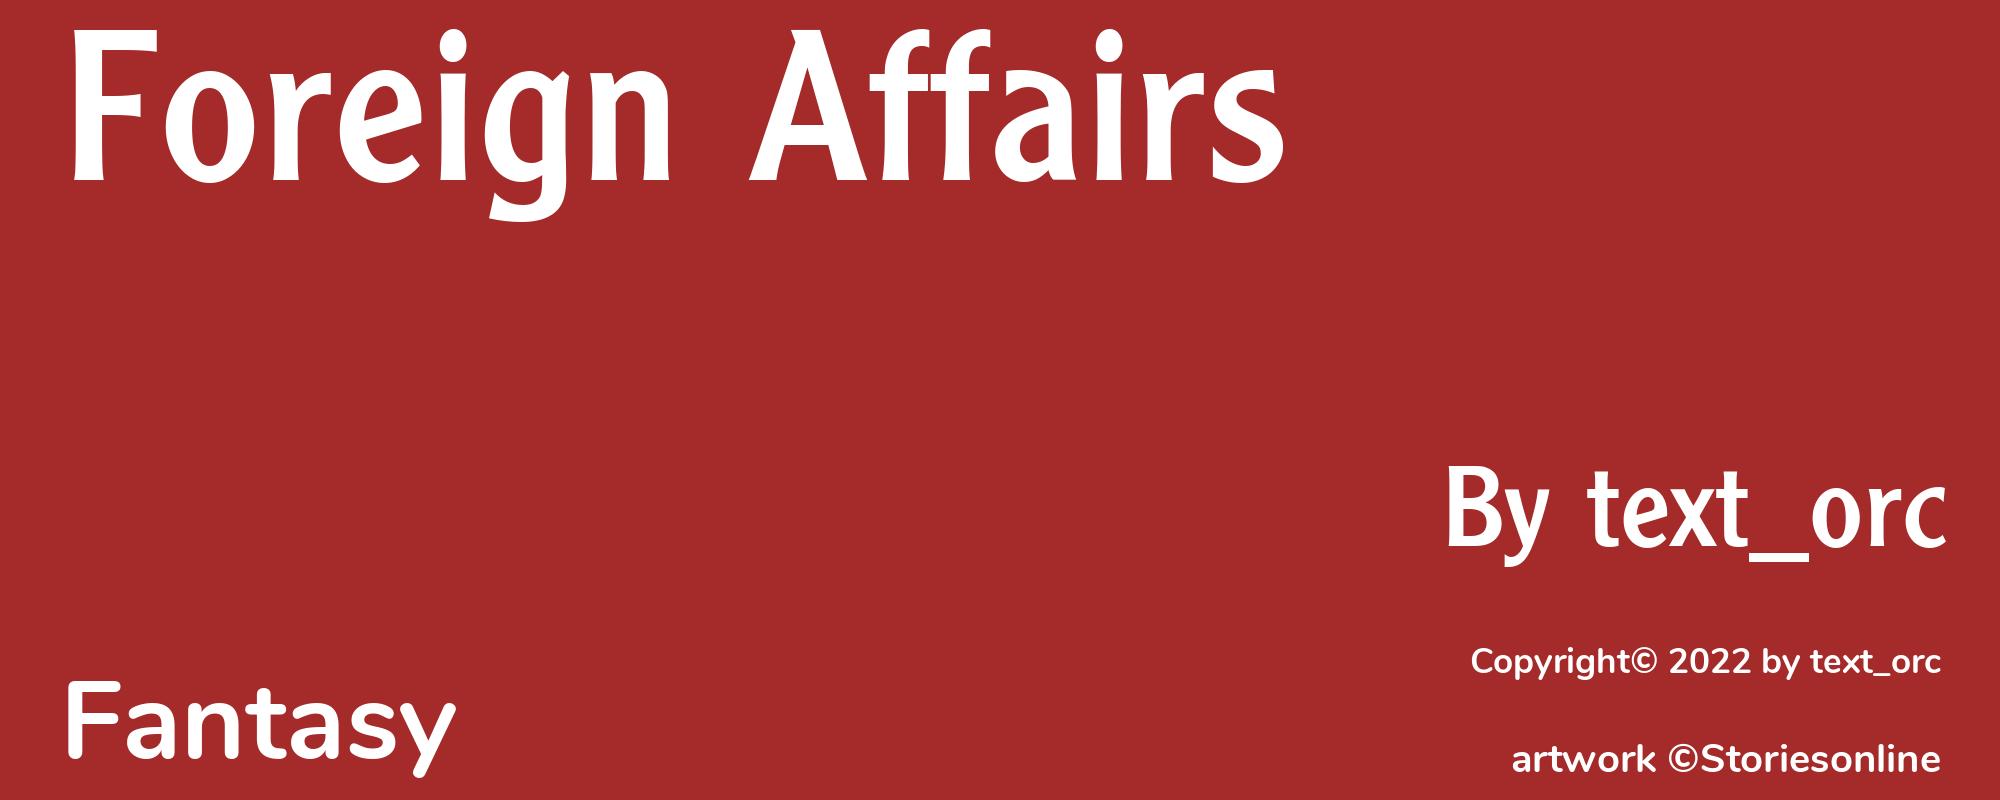 Foreign Affairs - Cover